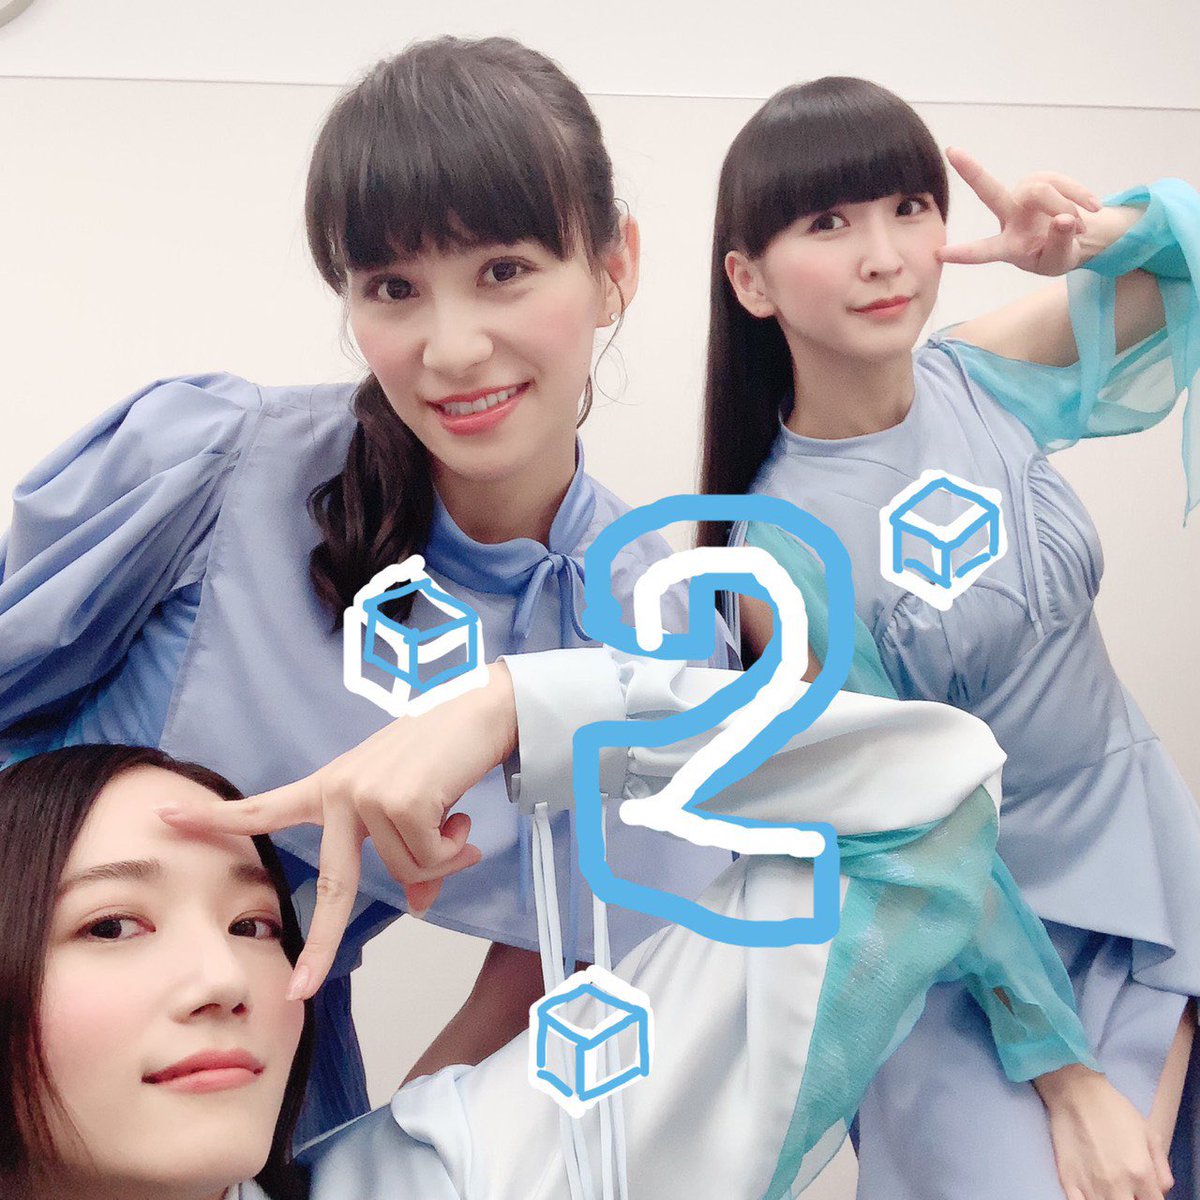 Perfume On Twitter 2 Days Until The Release Of Perfume The